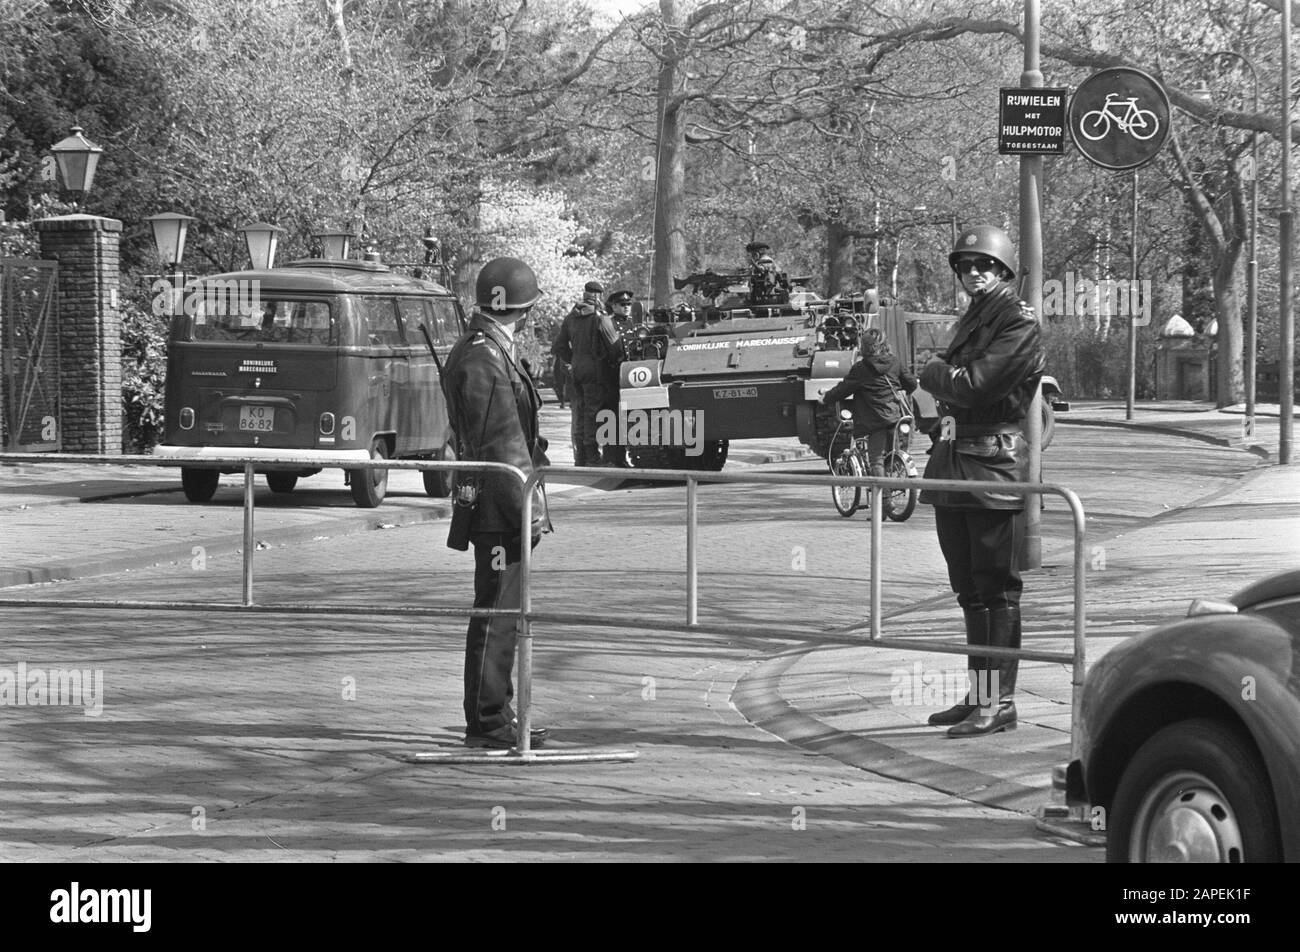 South Moluccans holding a meeting in Houtrusthal in The Hague concerning 22 year anniversary Republic of the South Moluccans Description: Guard with armored cars at official residence Indonesian Ambassador Date: 25 April 1972 Location: Wassenaar, Zuid-Holland Keywords: ambassadors, guards, meetings, independence movement, armored cars Stock Photo